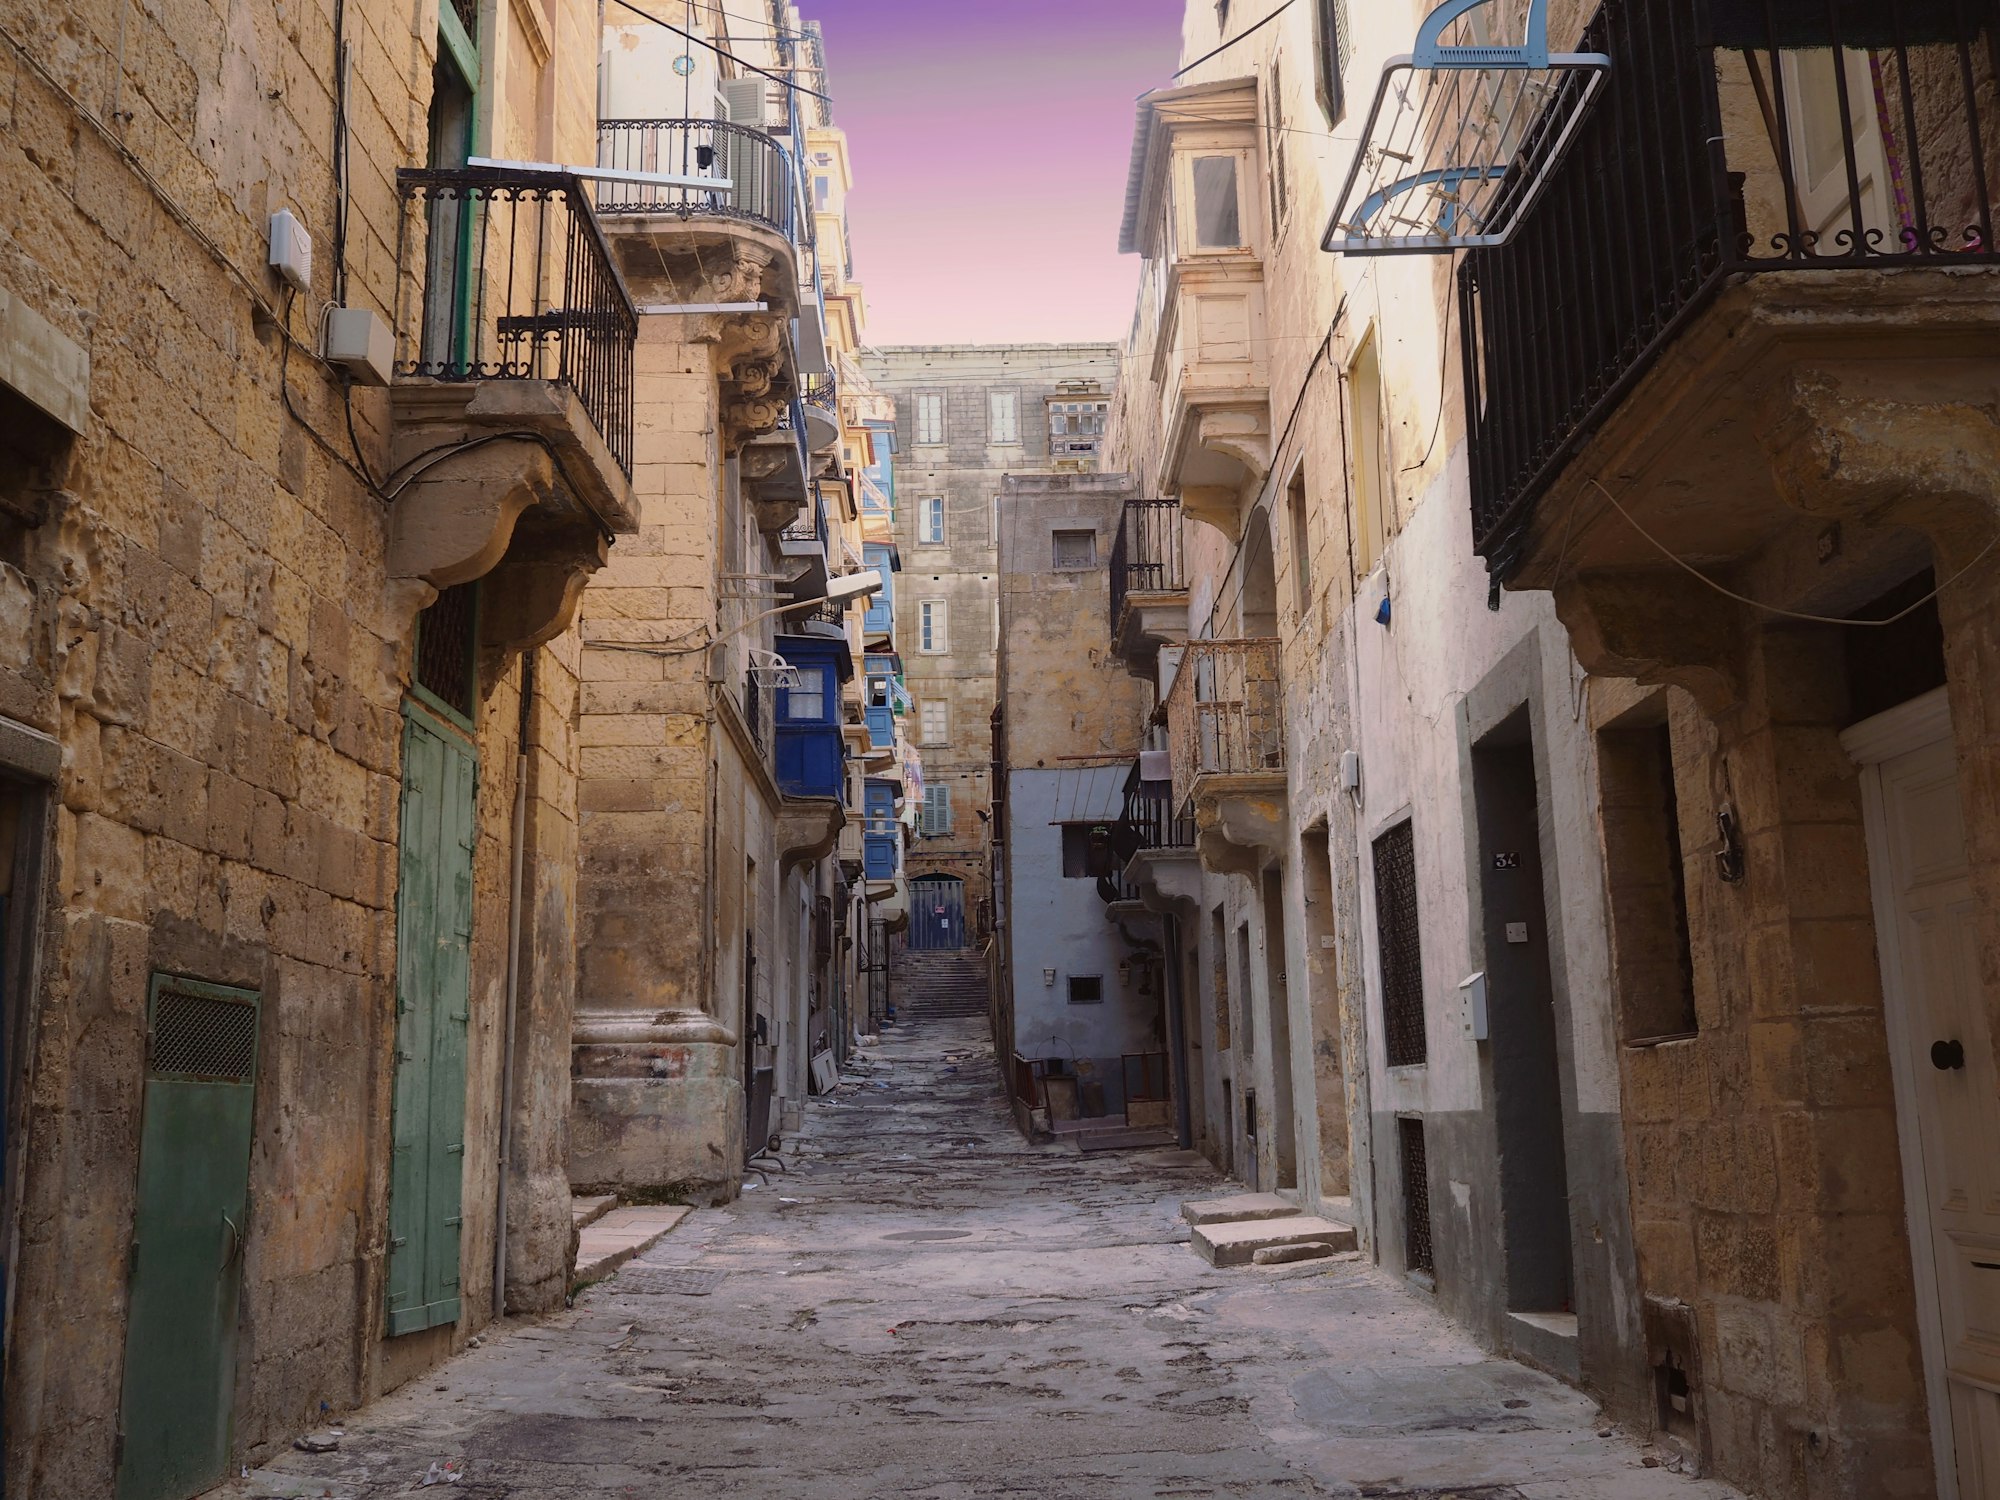 One of the old, quaint Valletta narrow roads.